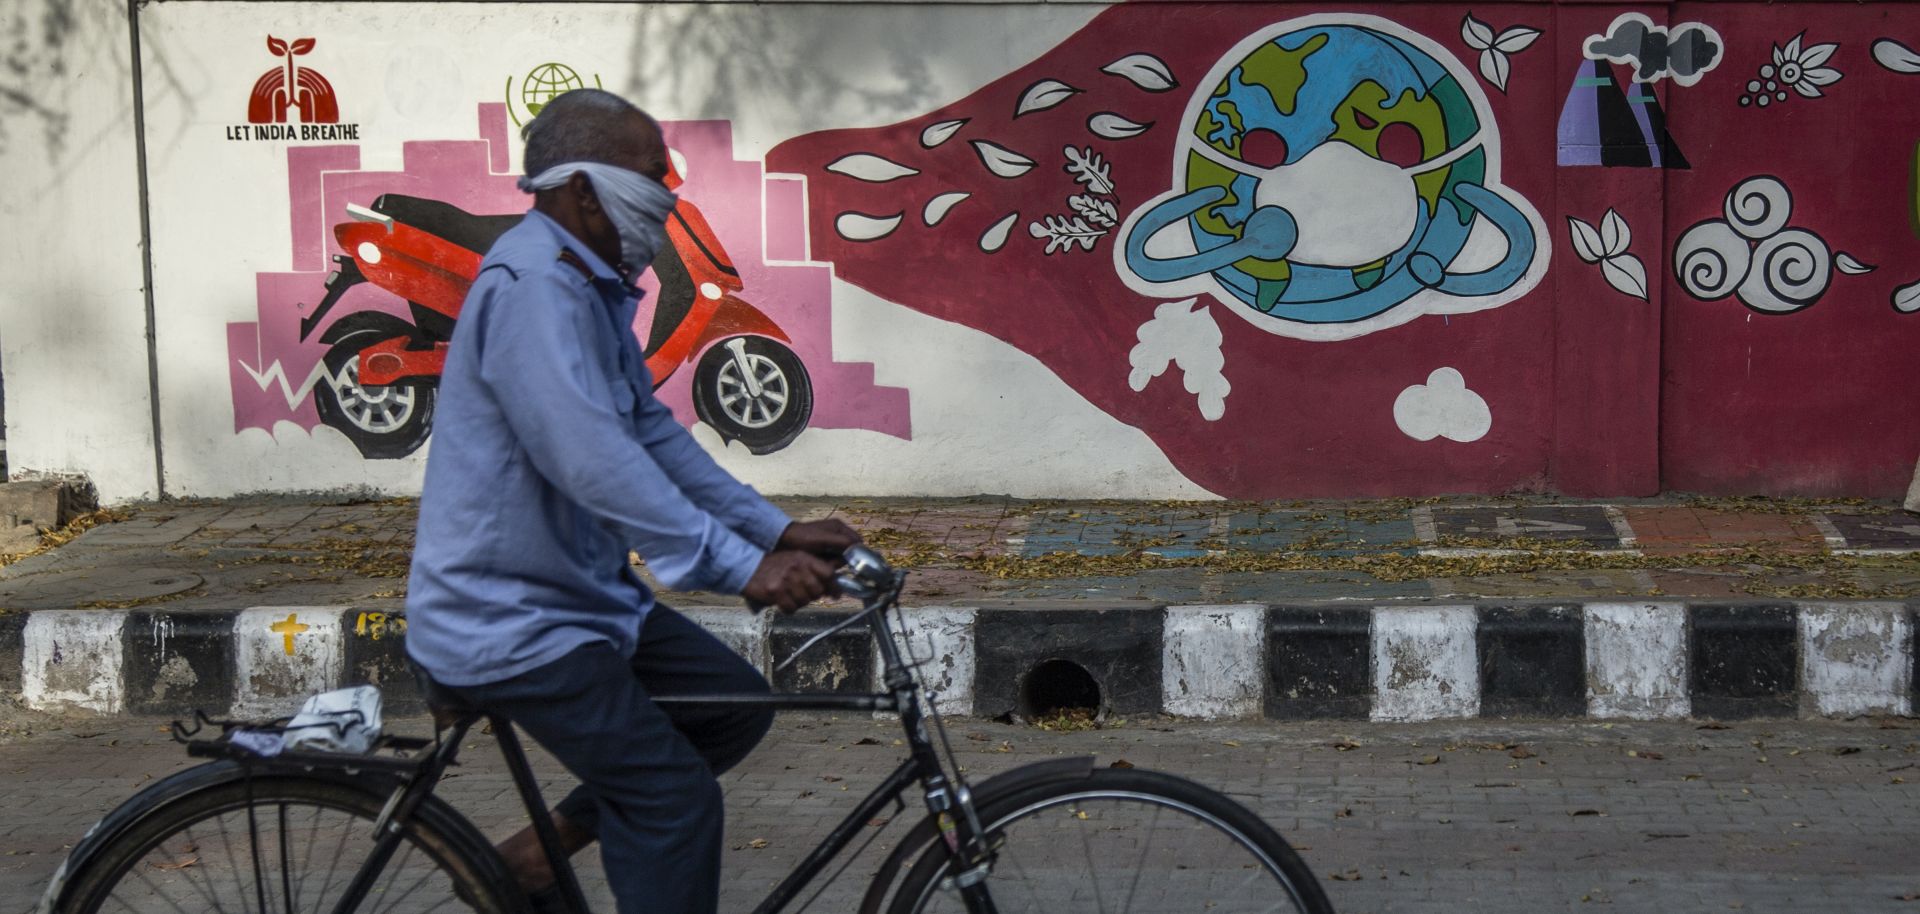 A man wearing a bandana peddles his bicycle in front of a mural depicting the globe covered in a mask on April 13, 2020, in New Delhi, India.